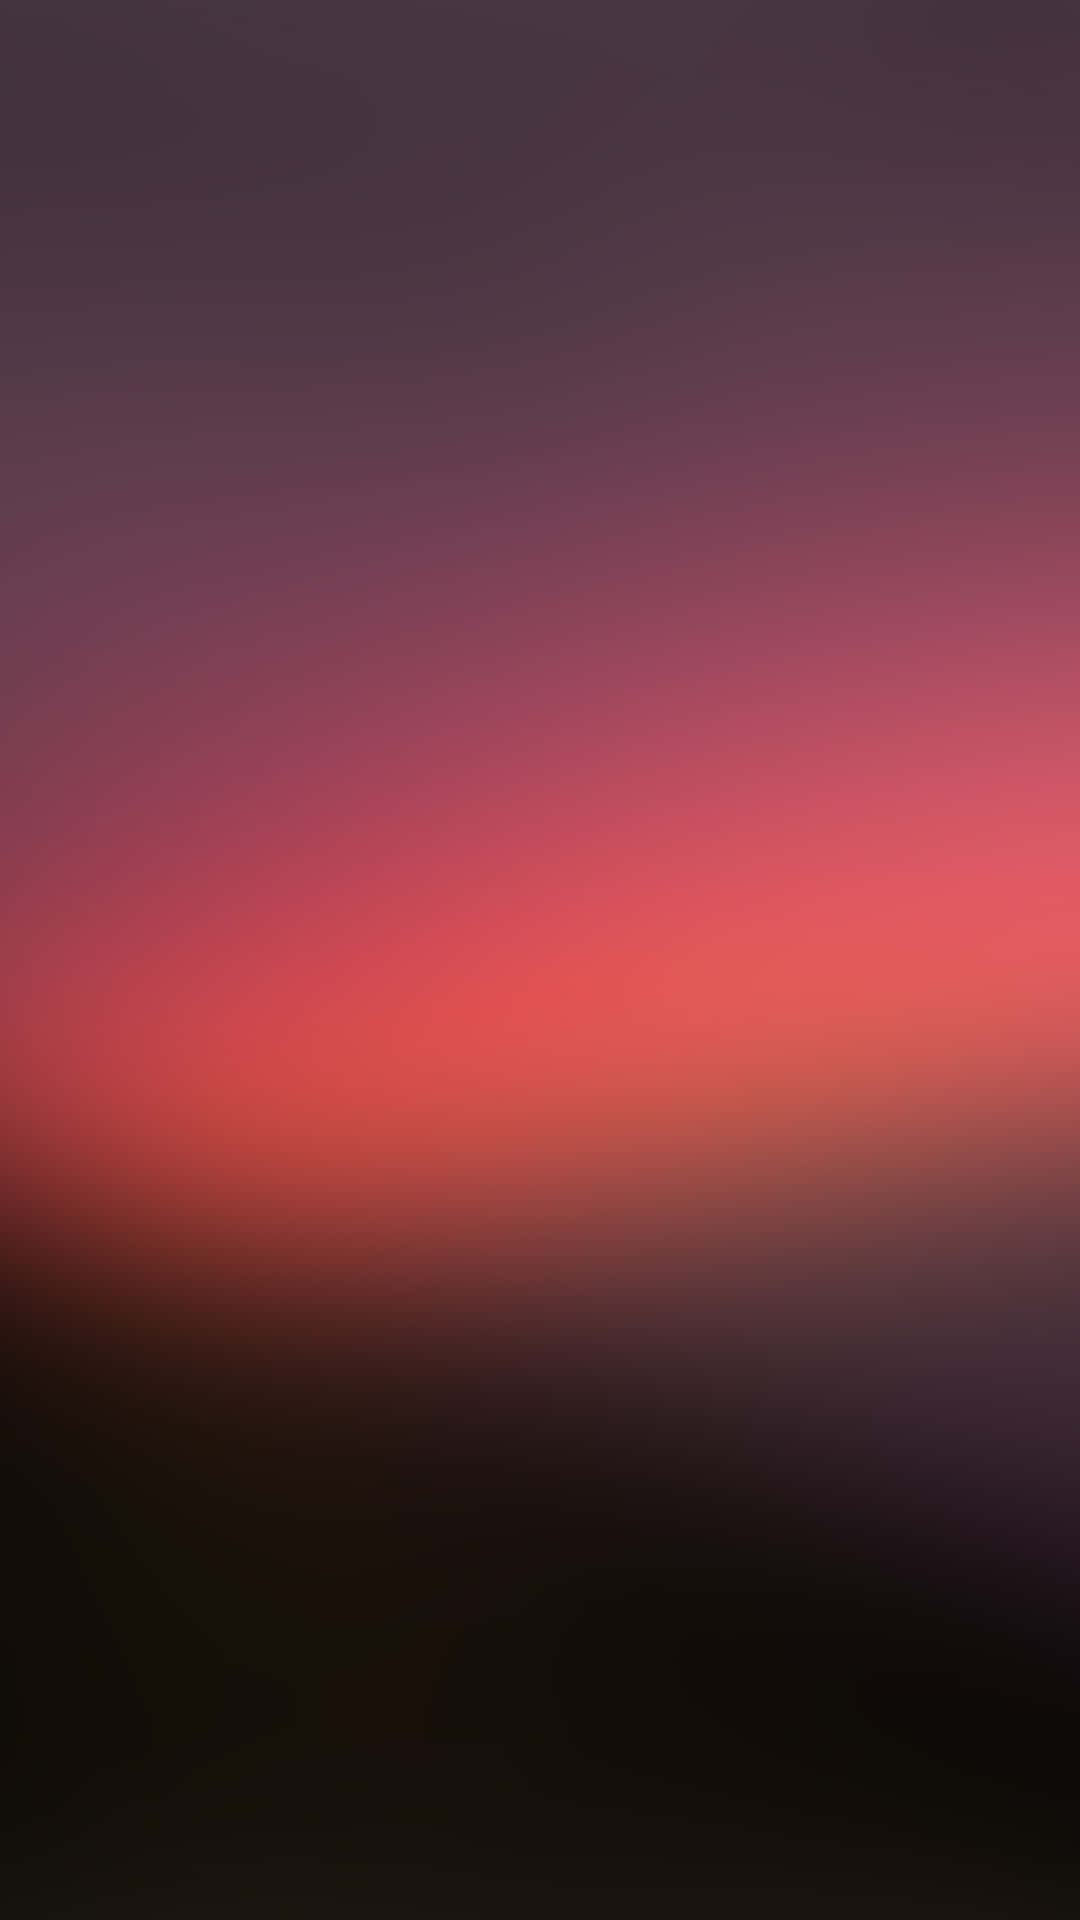 Gradient In Black And Pink iPhone Wallpaper